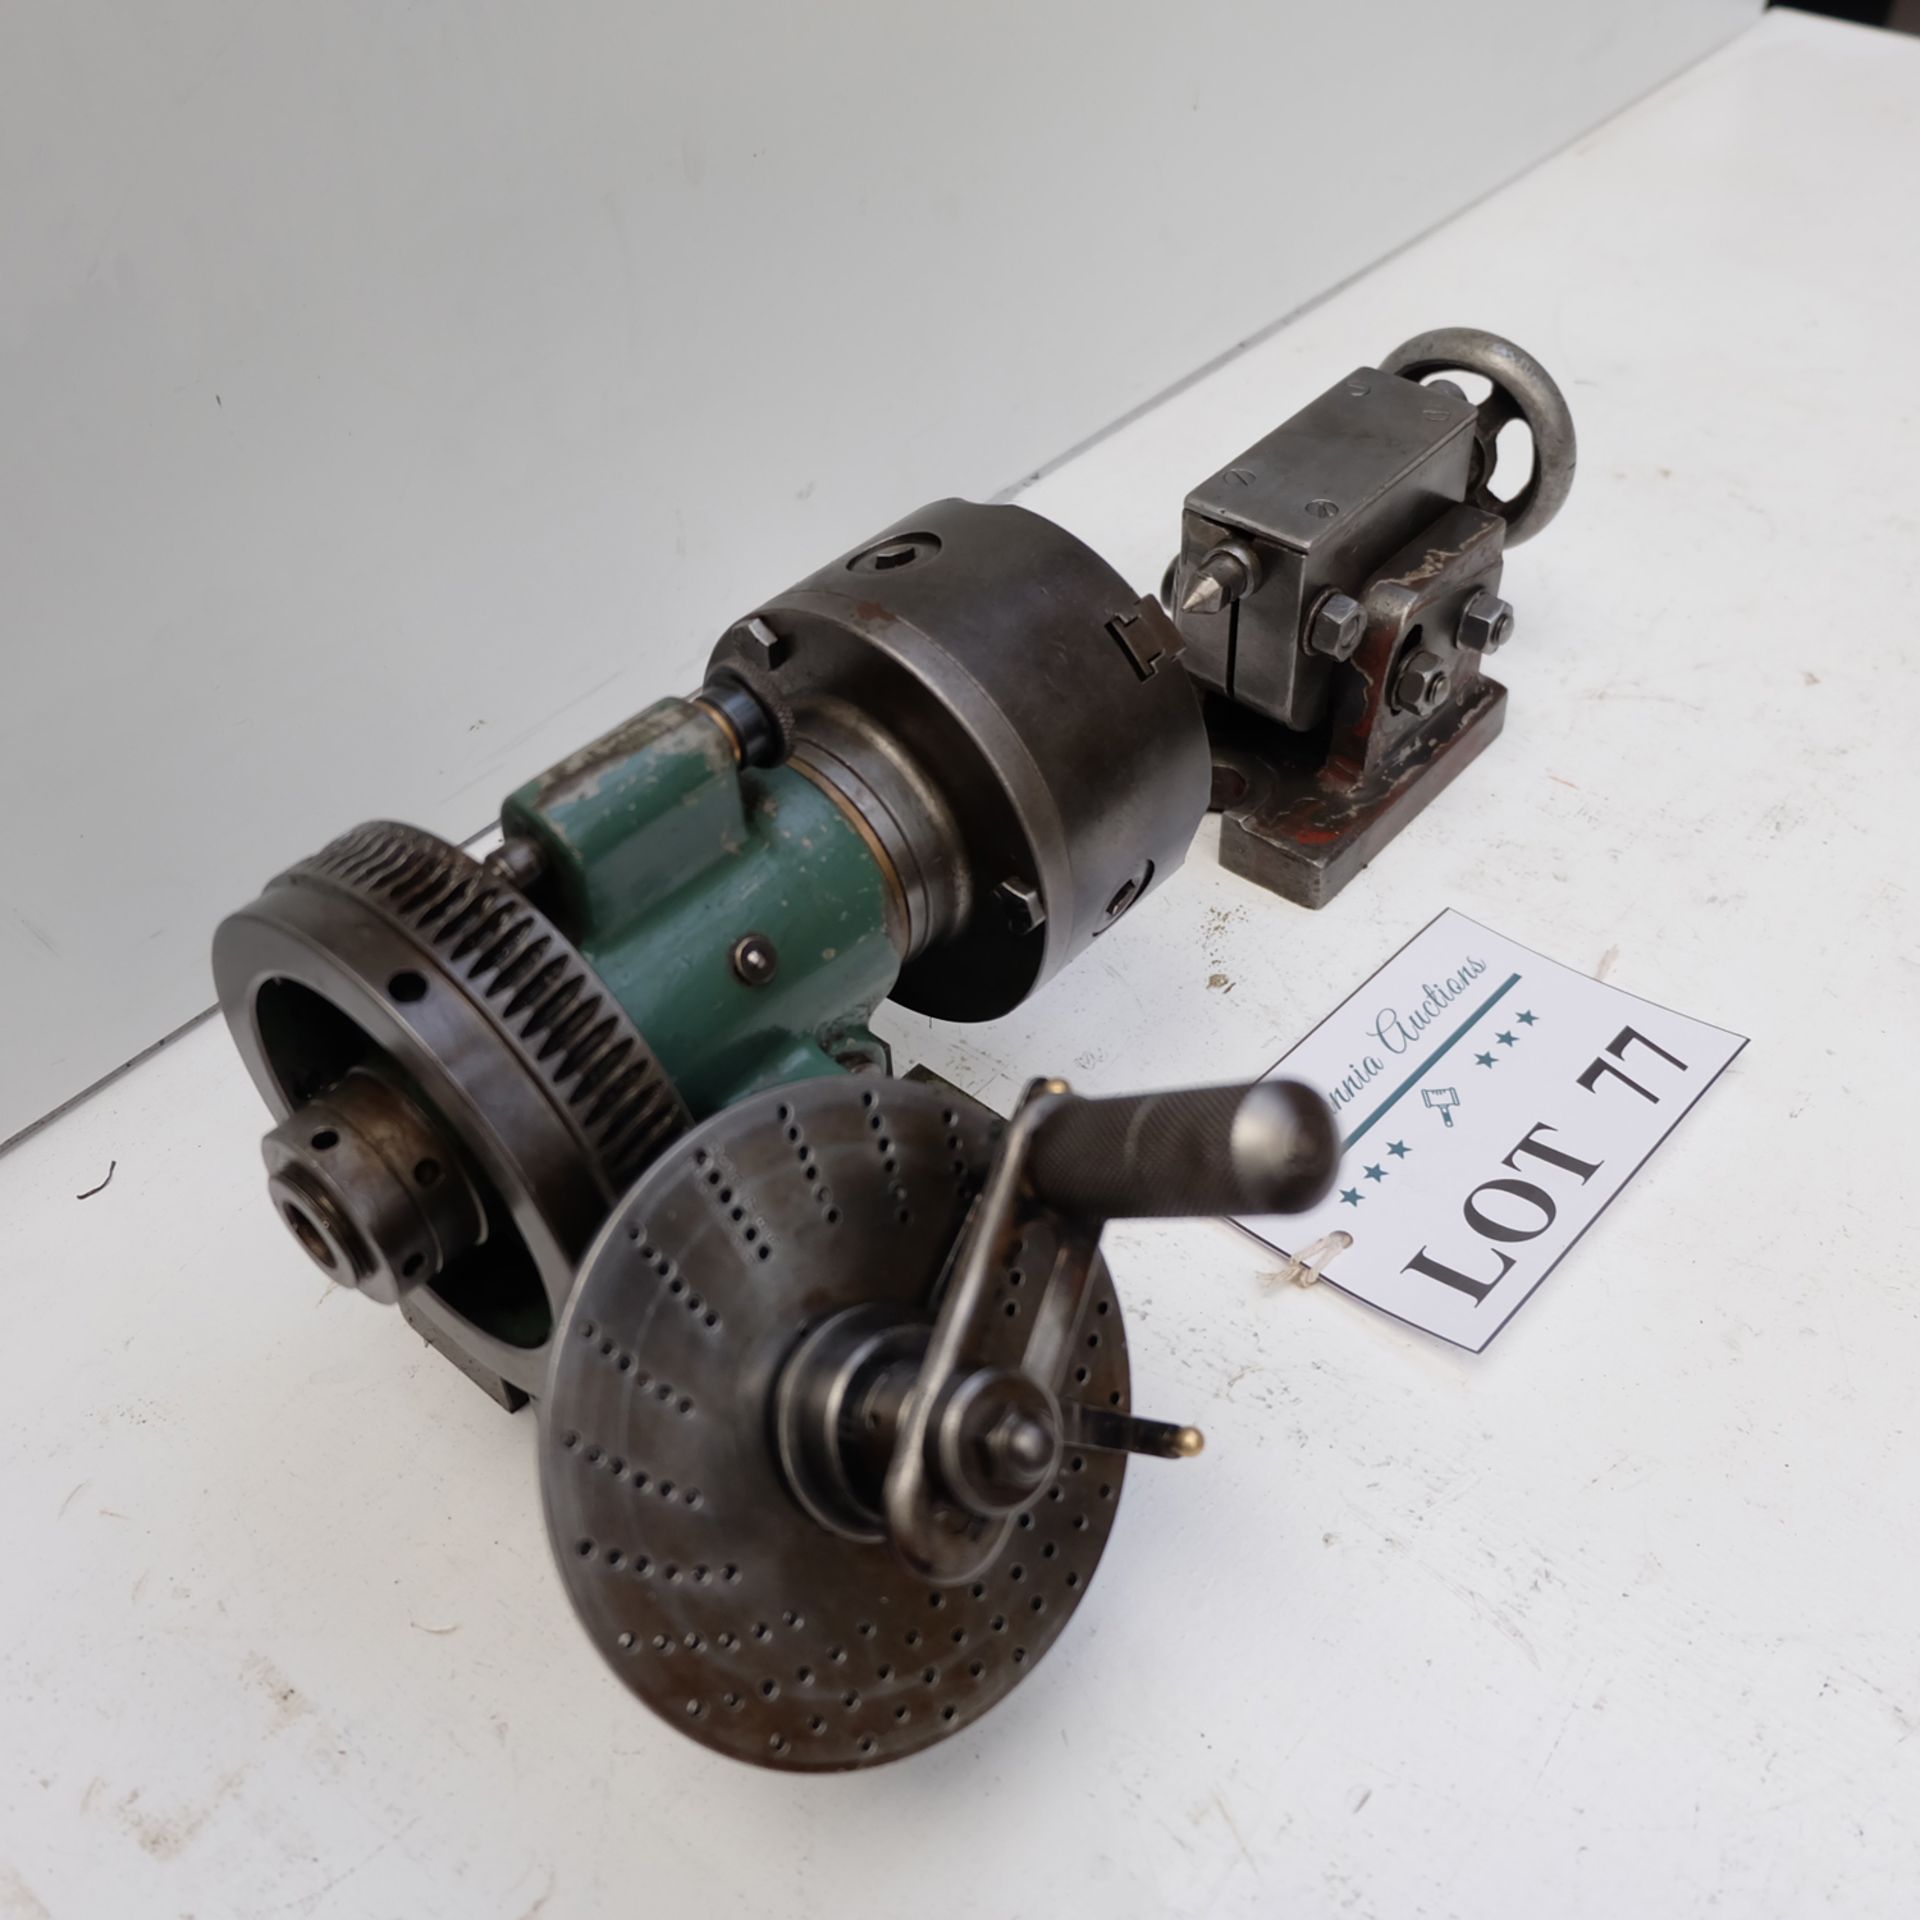 Clarkson 4" Dividing Head. With 4" 3 Jaw Chuck & Tail Stock. - Image 2 of 6